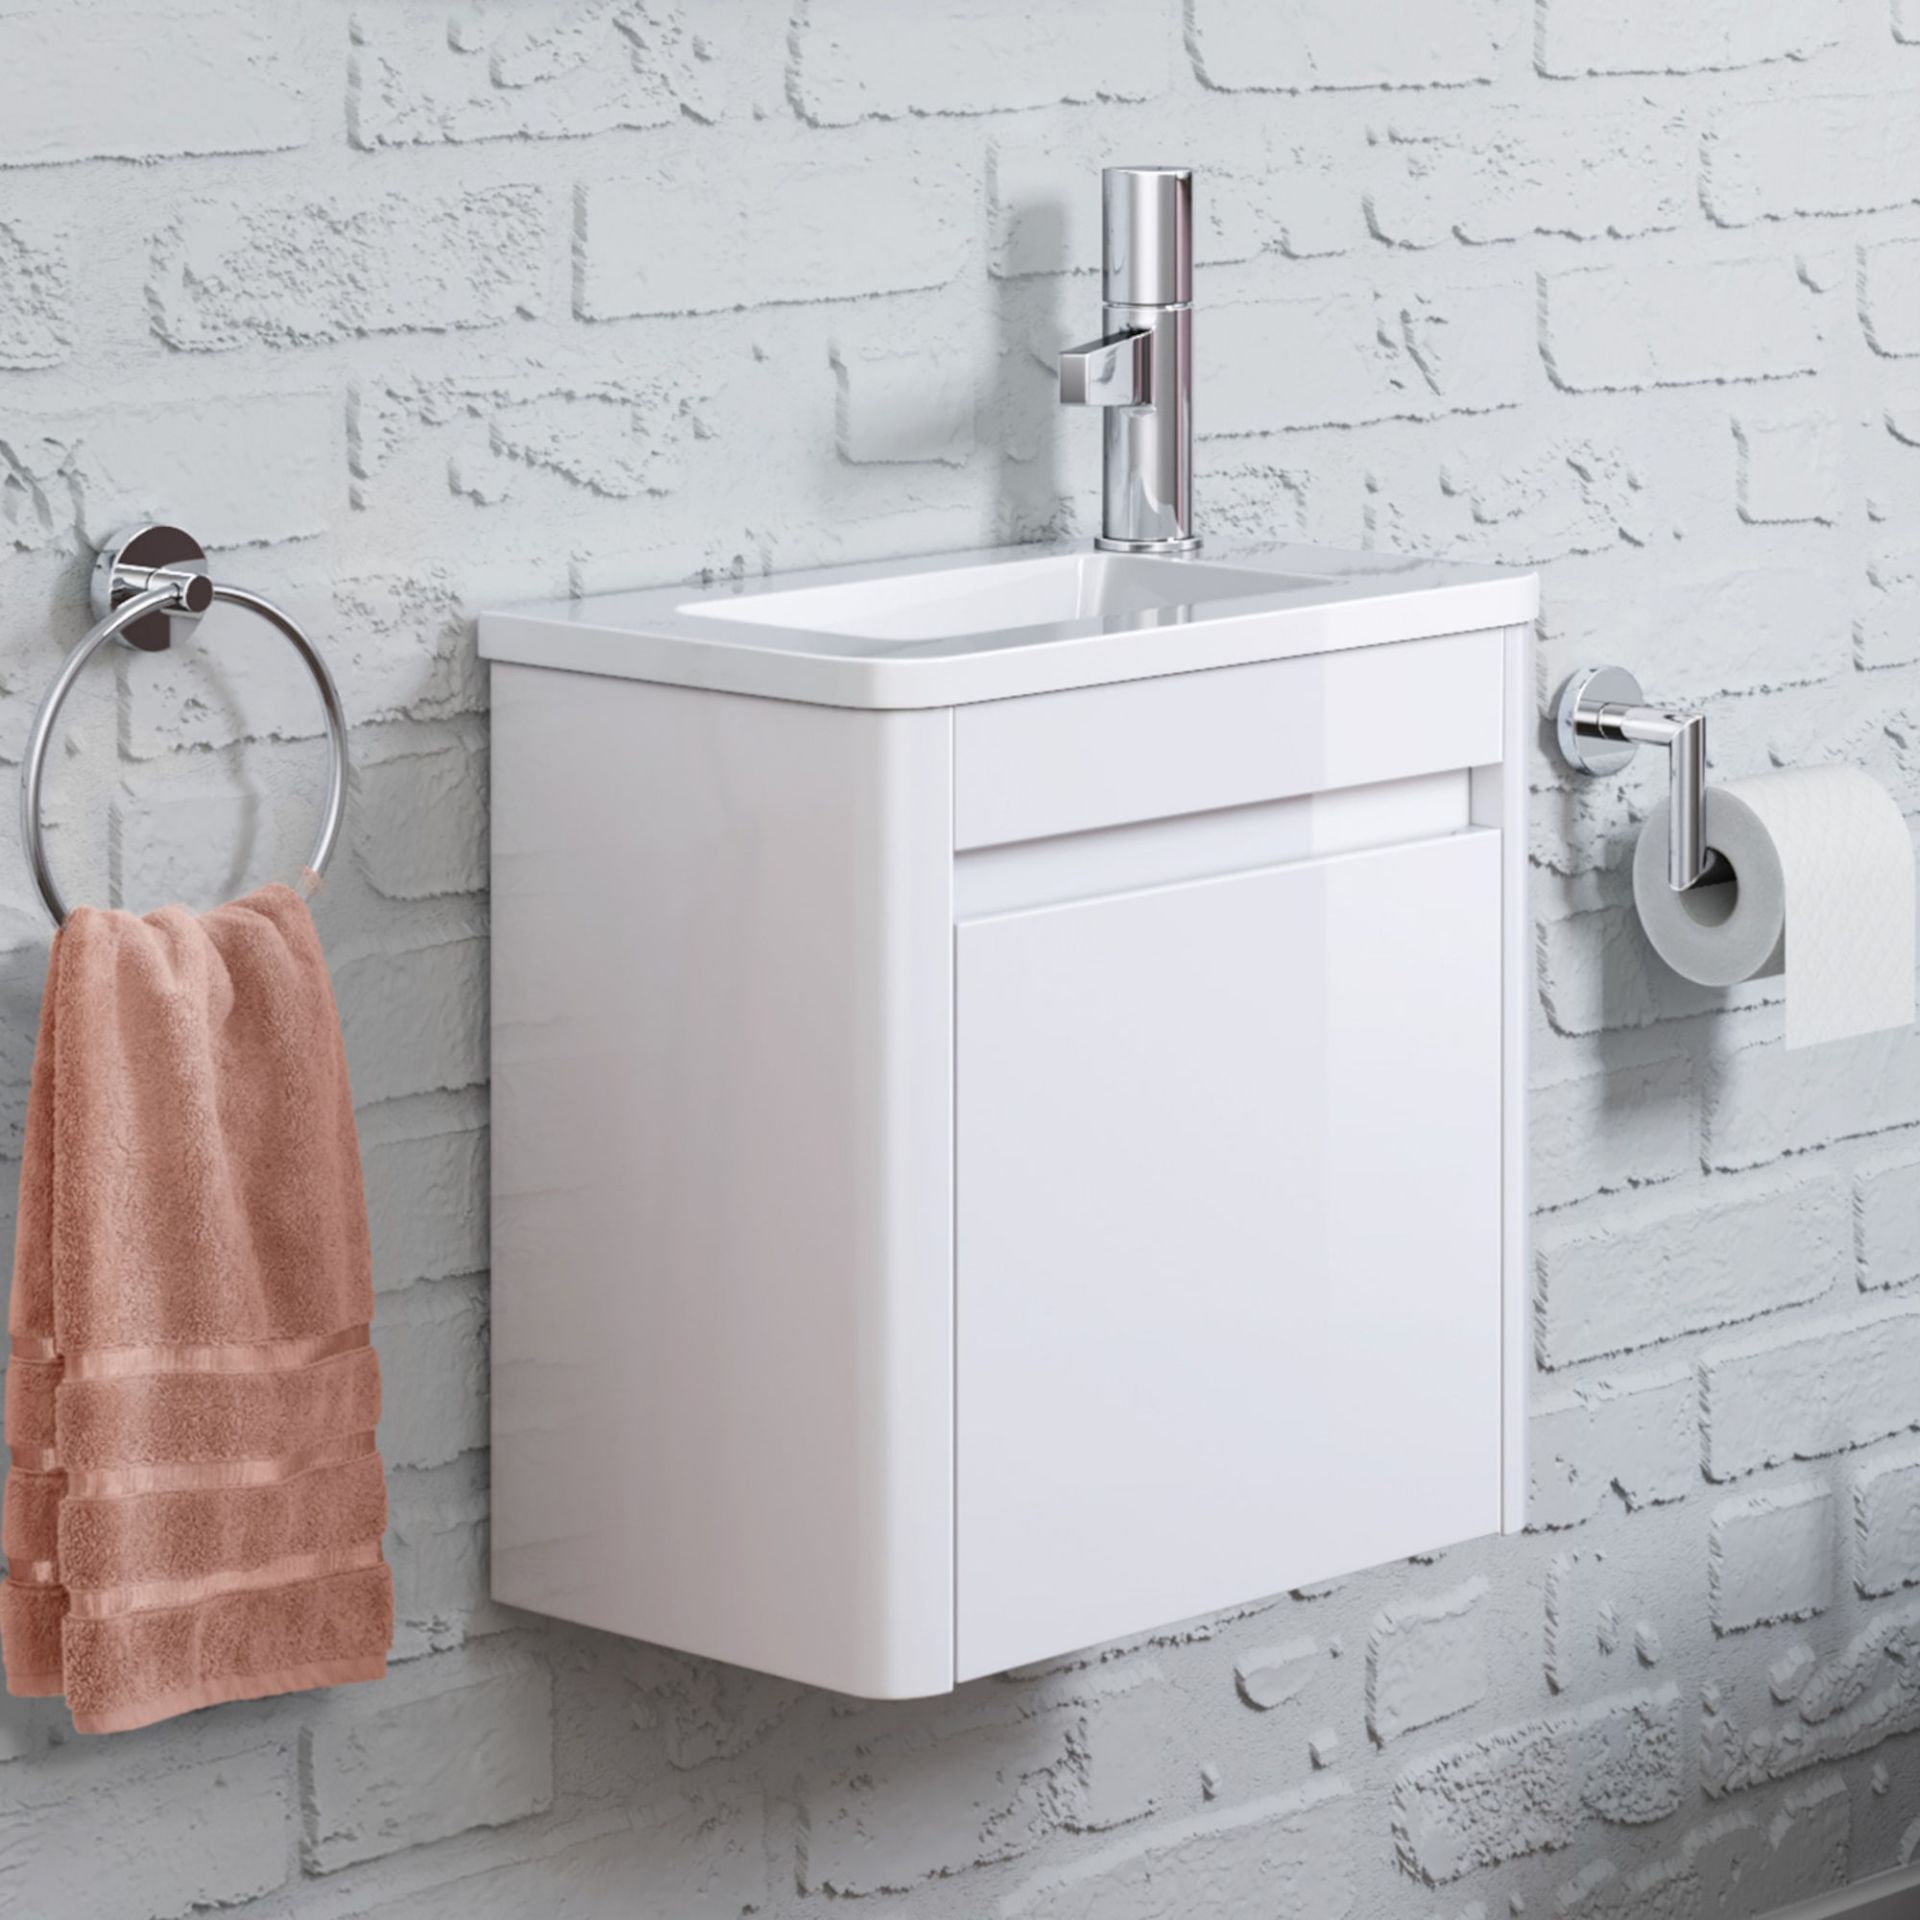 (PP24) 400mm Denver White Right Hand Cloakroom Vanity Unit - Wall Hung. RRP £299.99. Comes com...